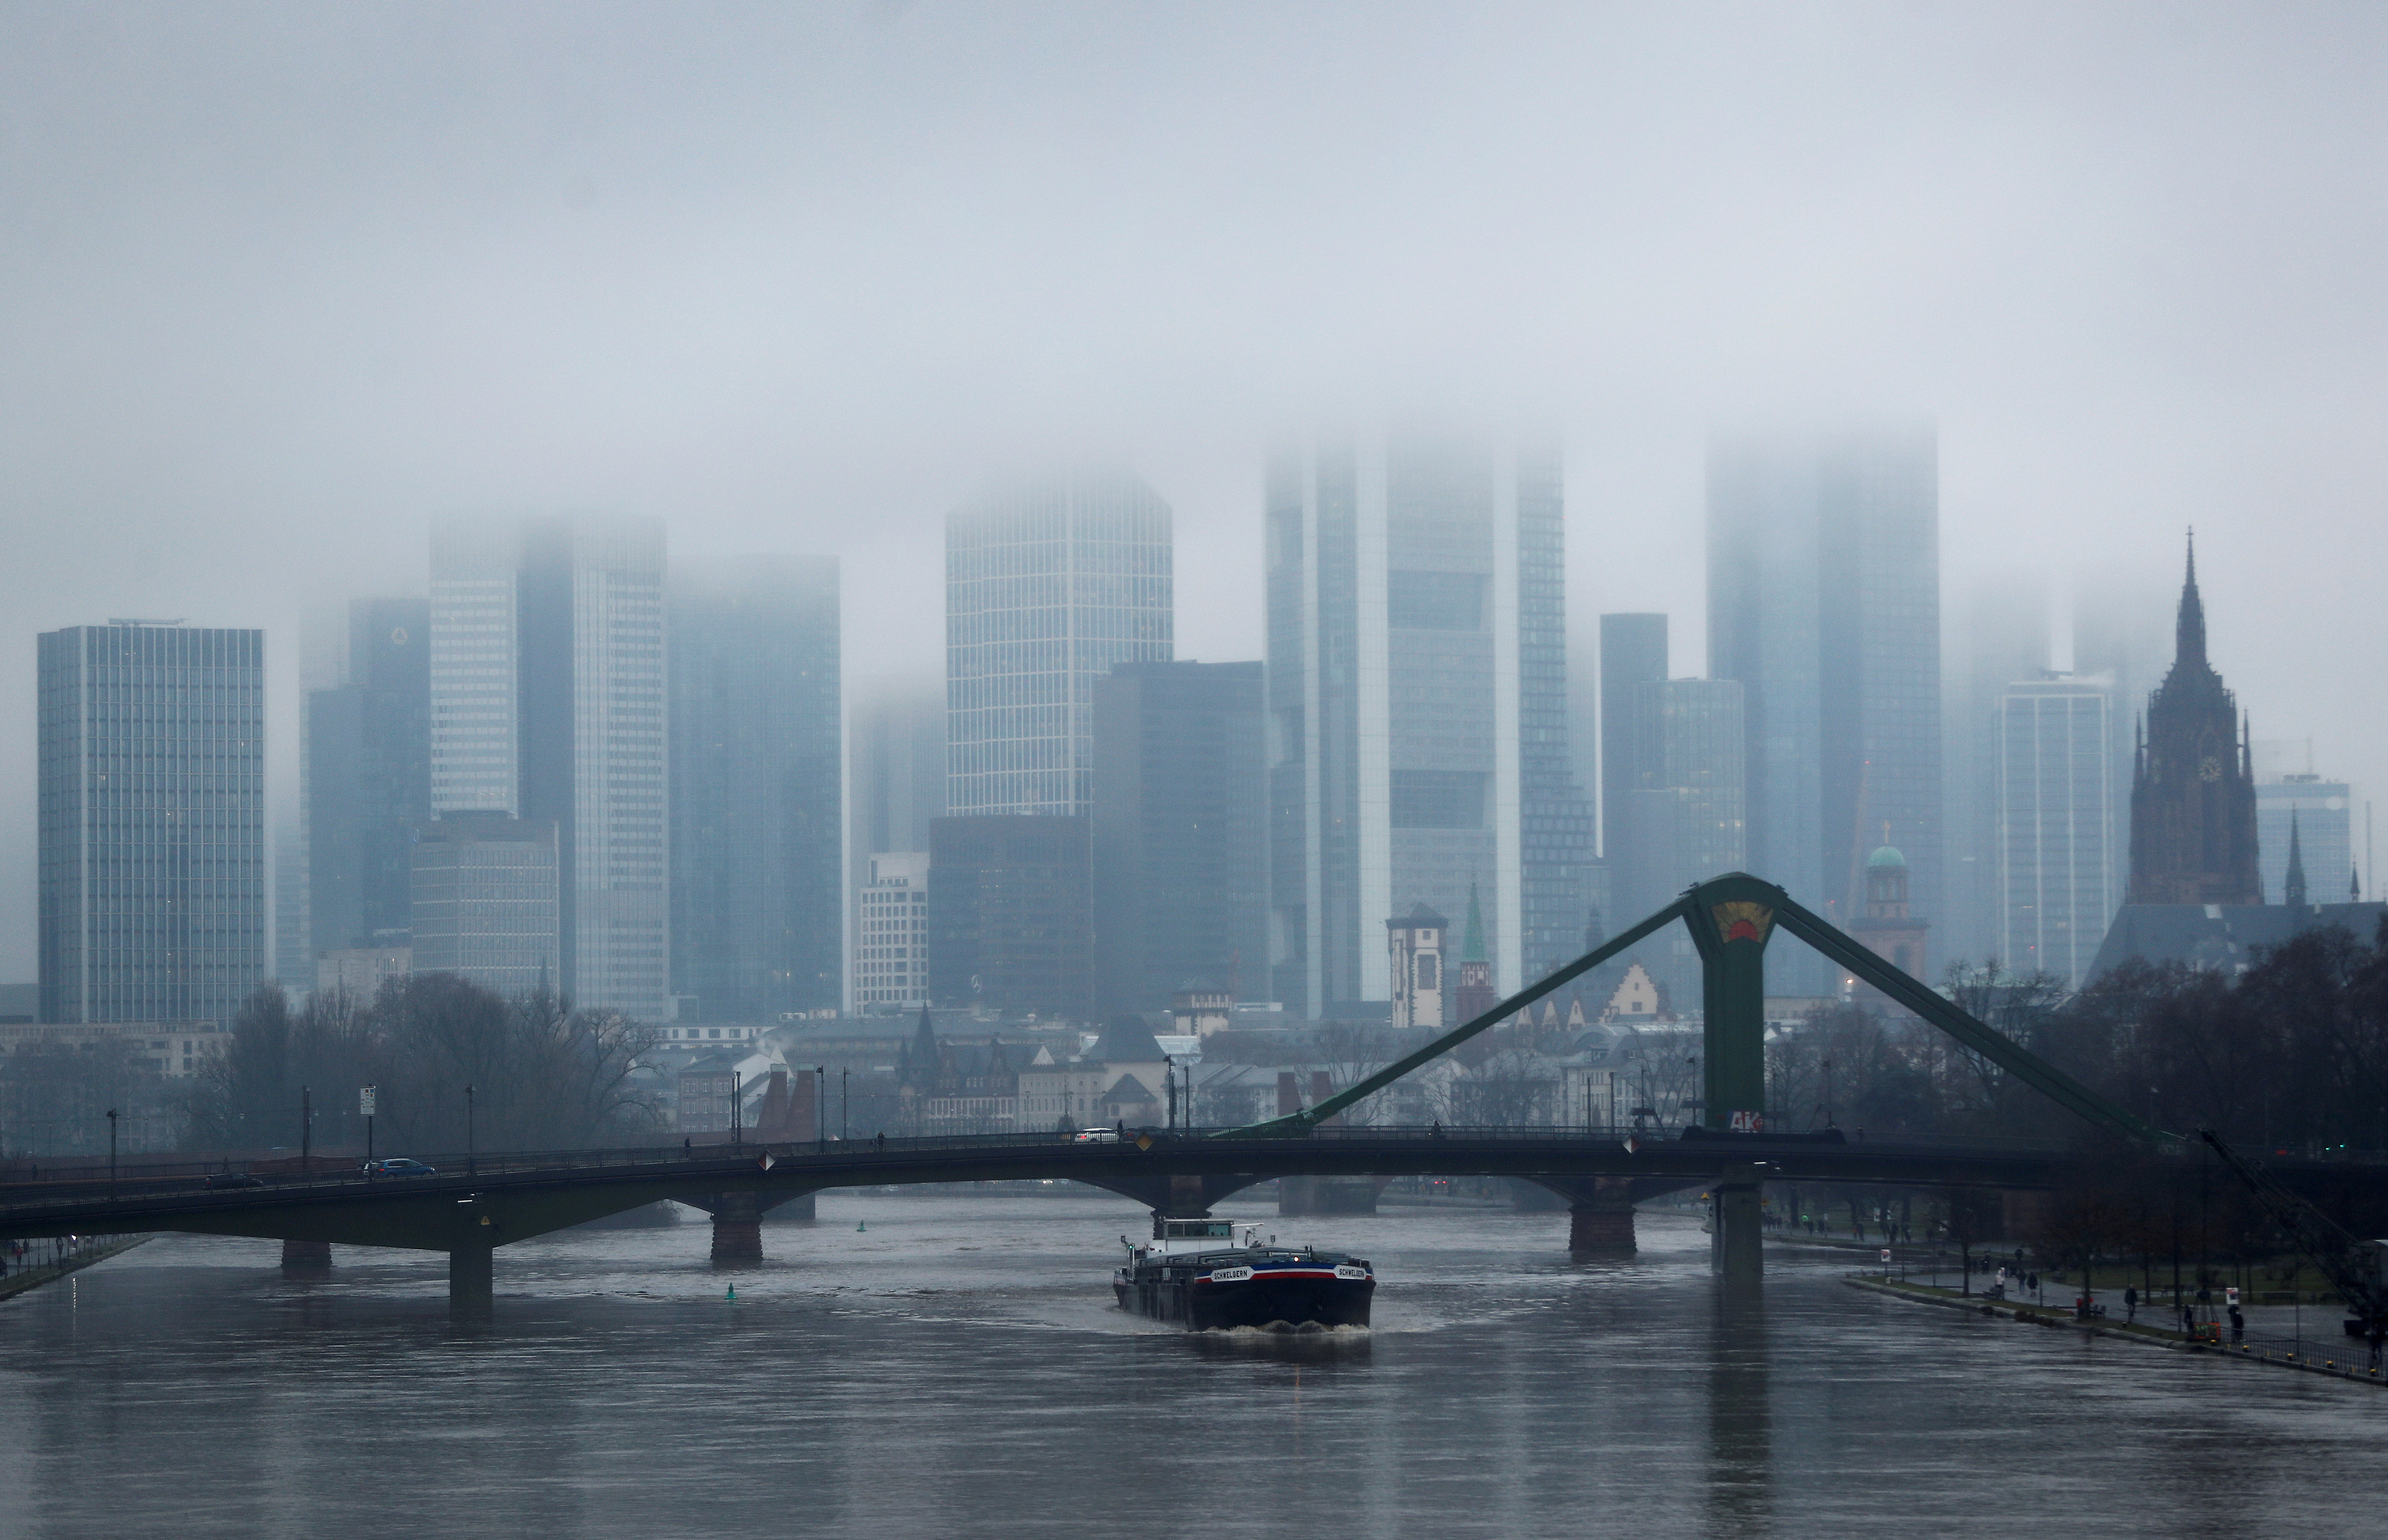 The spread of COVID-19 continues during extended lockdown in Frankfurt